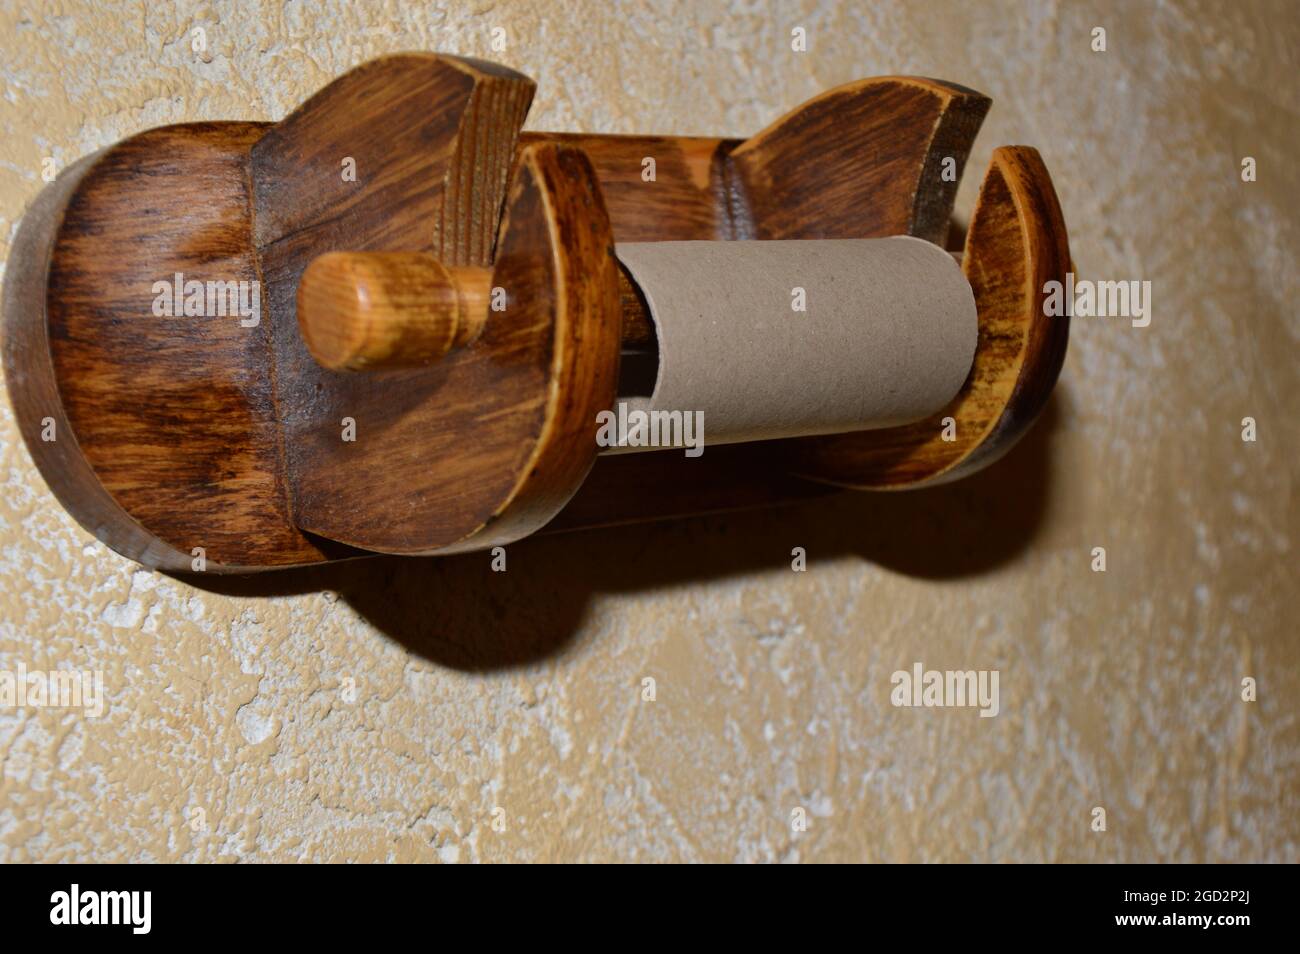 Empty toilet paper roll on a wooden hanger Stock Photo - Alamy